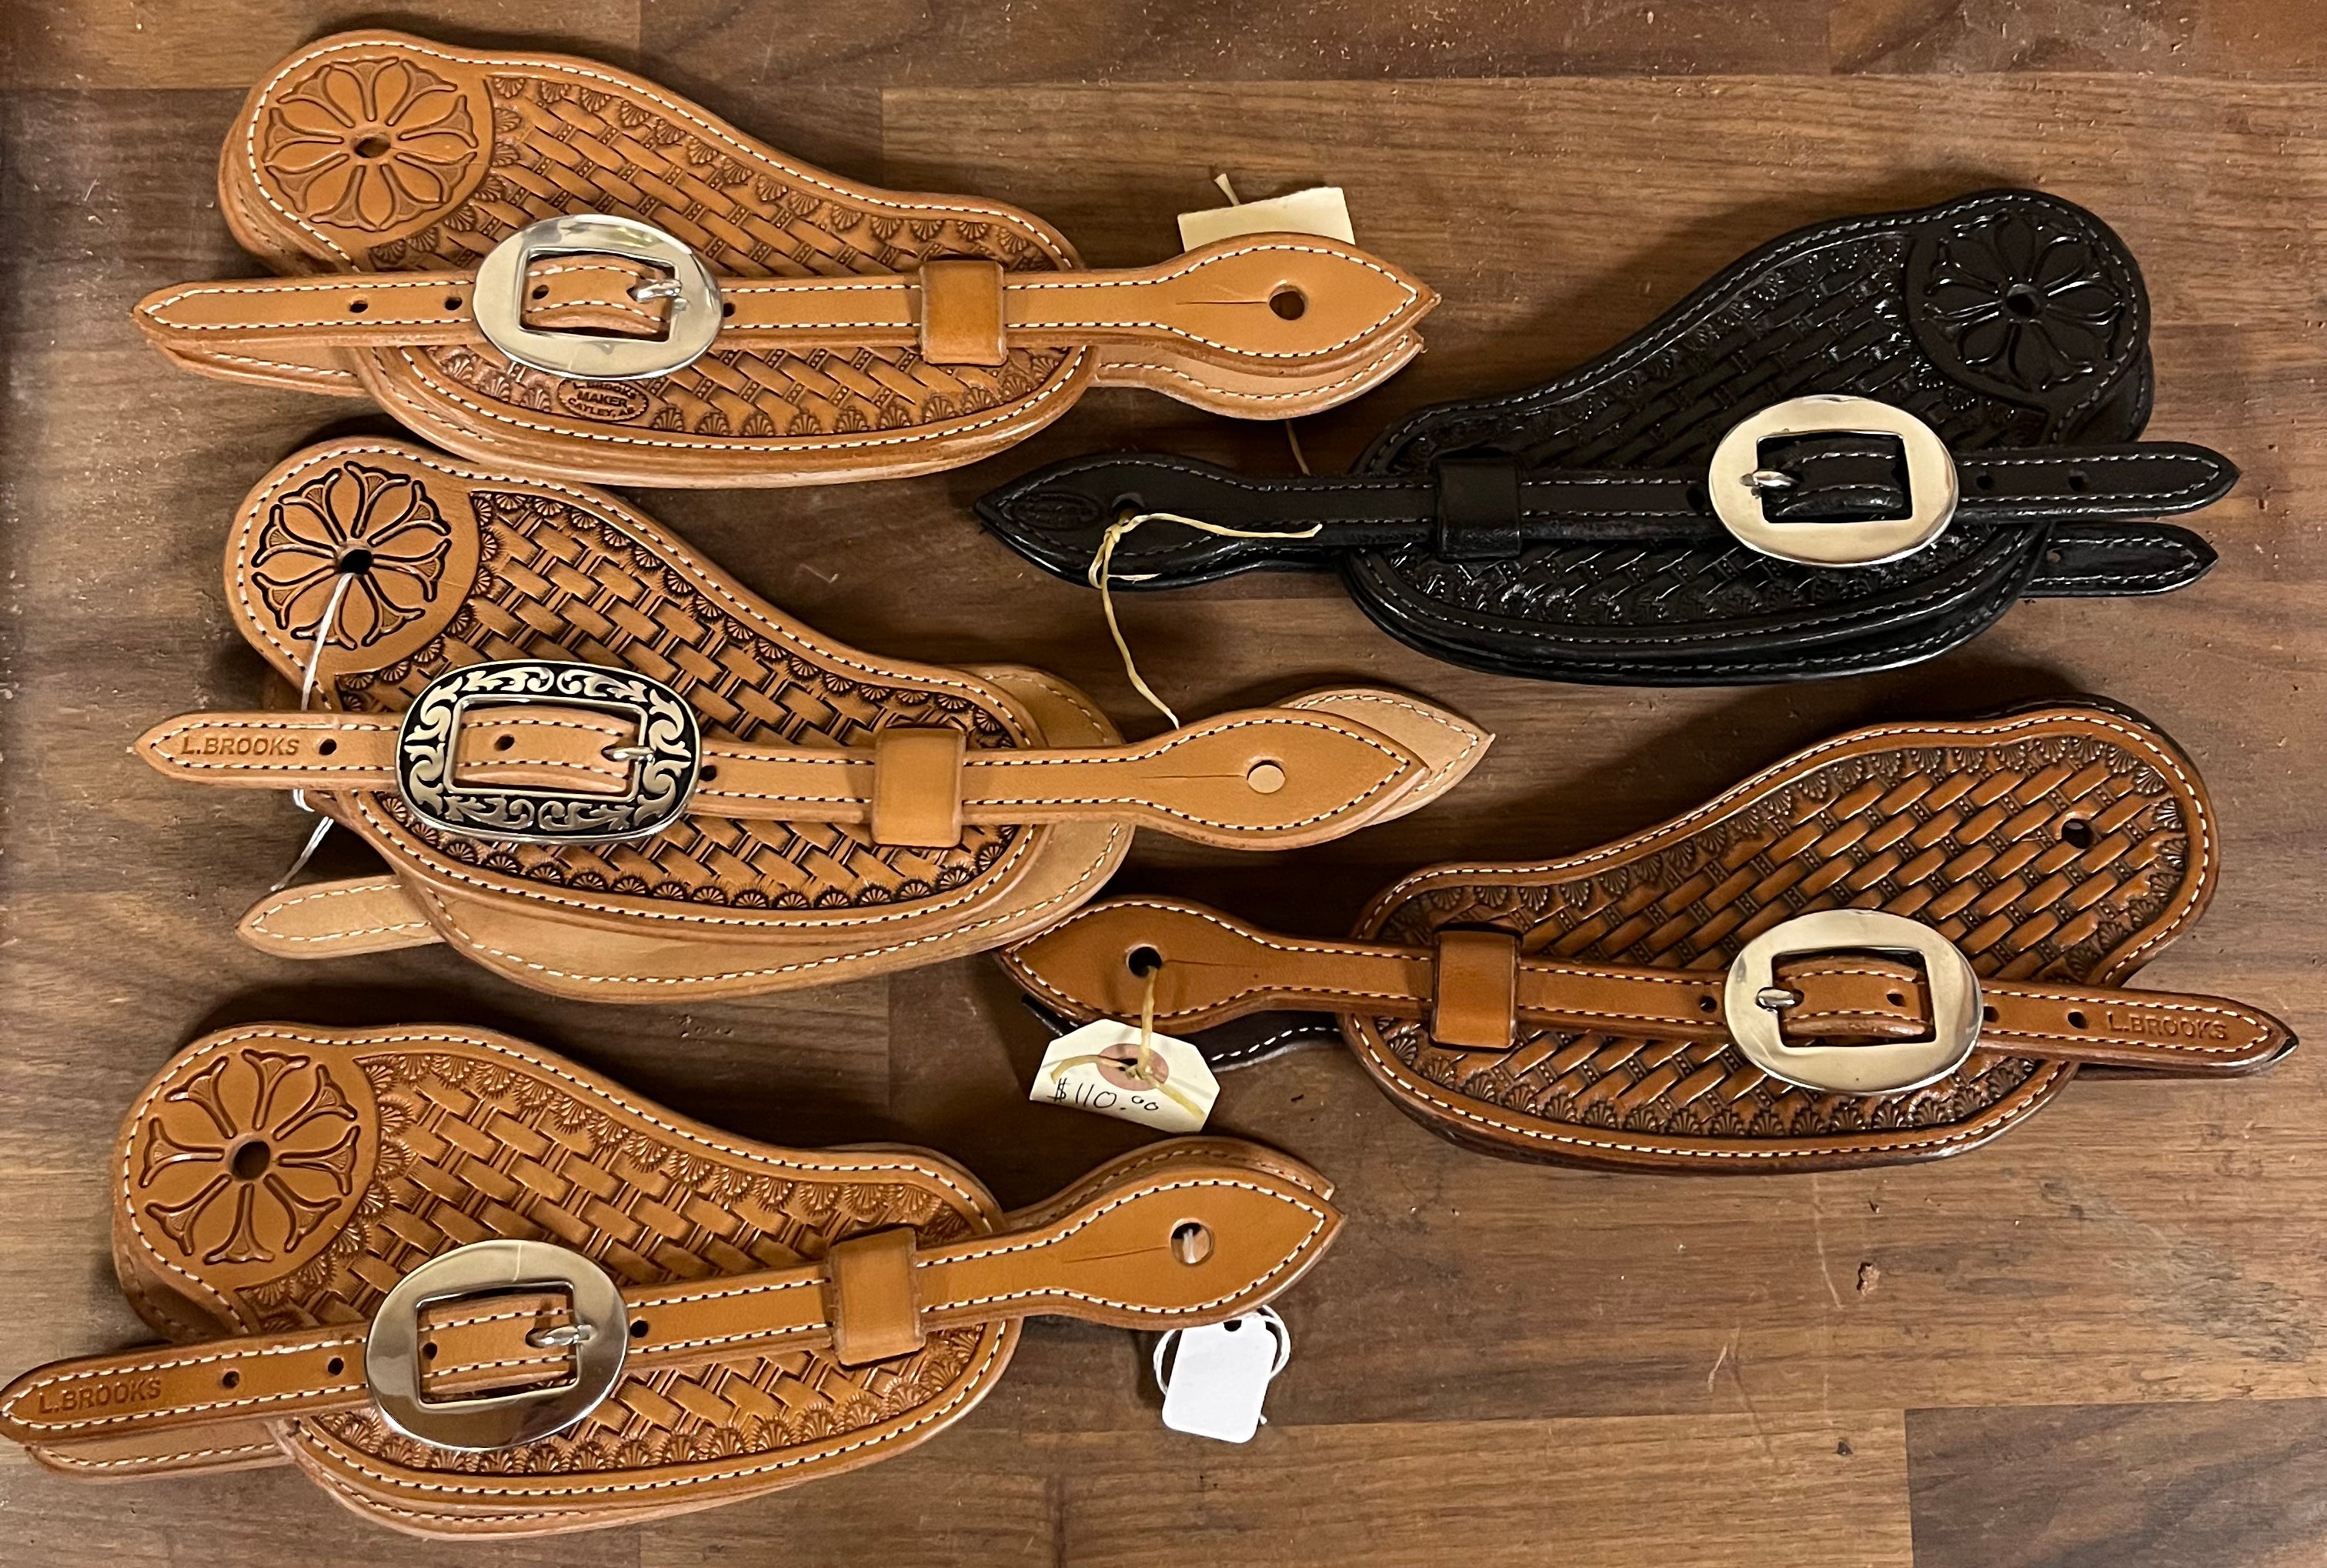 Whisky Buckstitch Buckaroo Spur Straps with Your Choice of Buckles